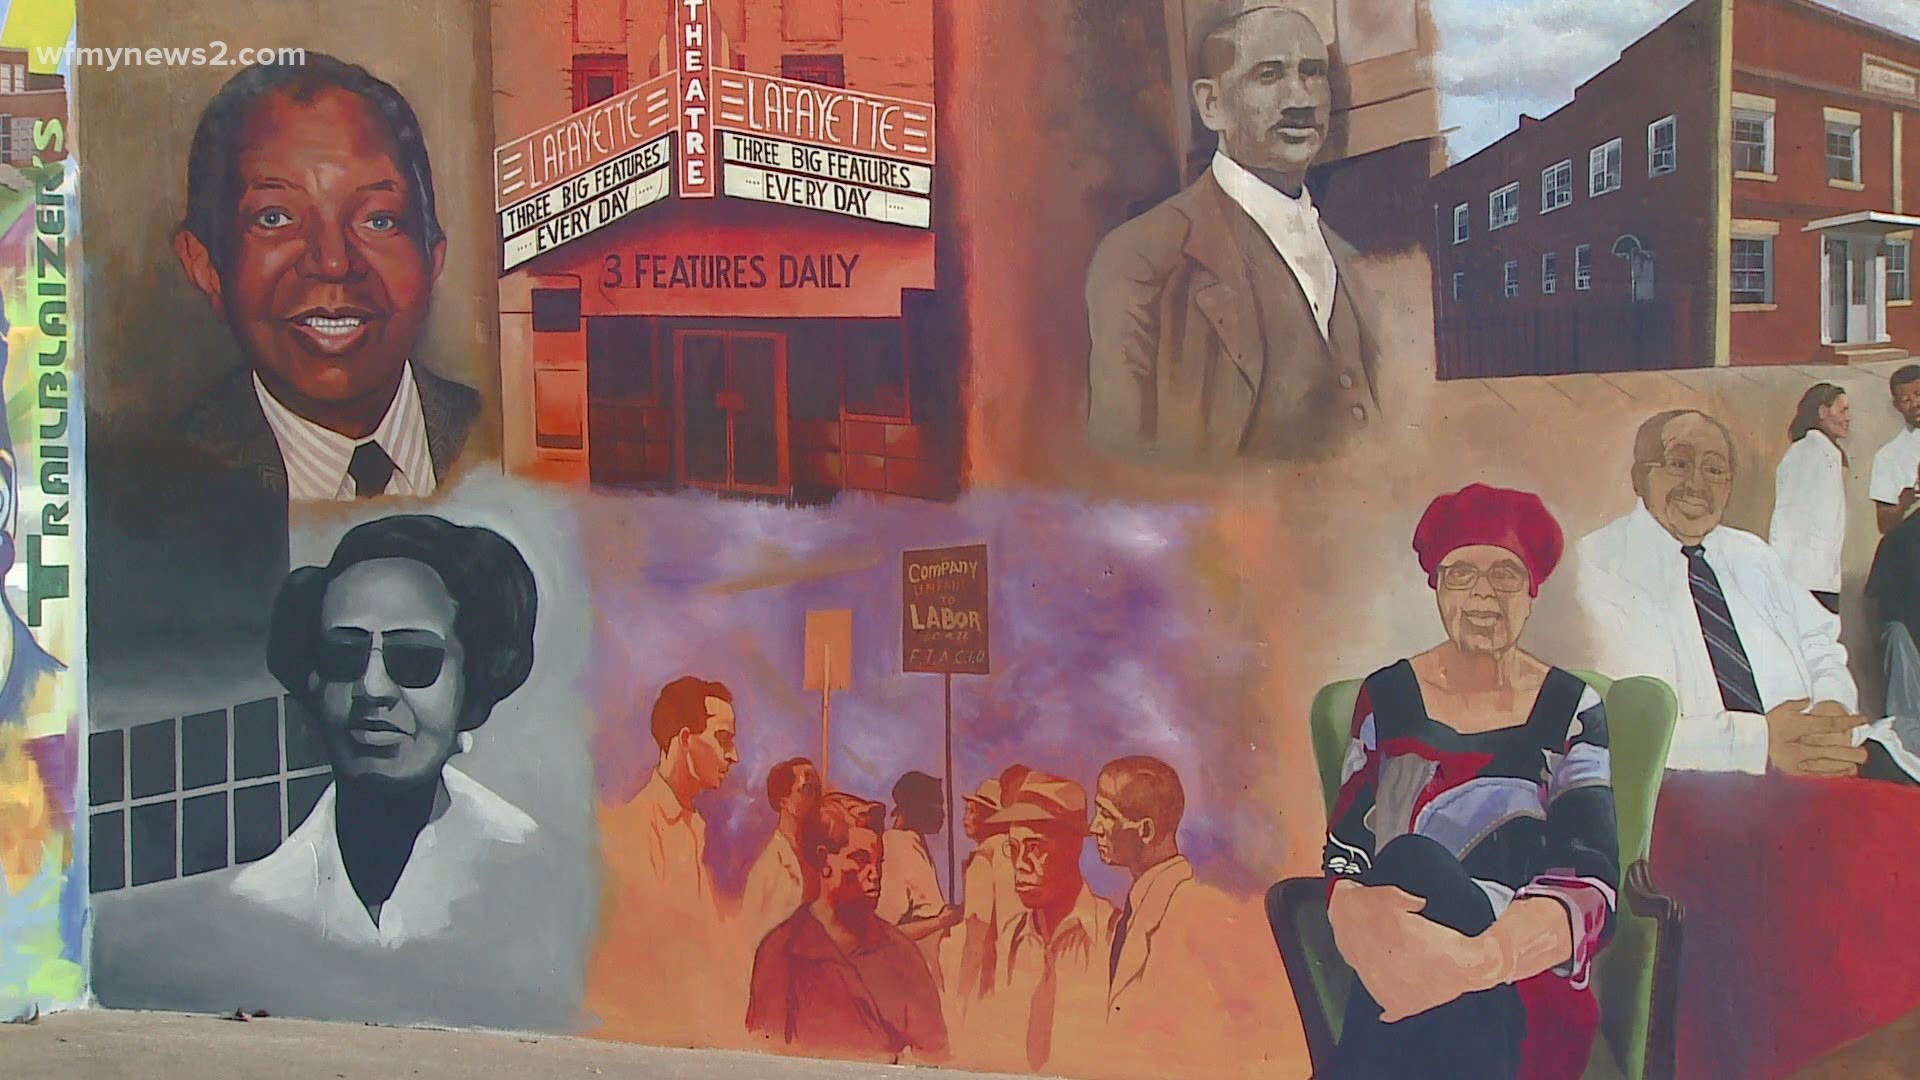 Local artist Leo Rucker painted the mural that depicts more than two dozen people who’ve played a role in the community.